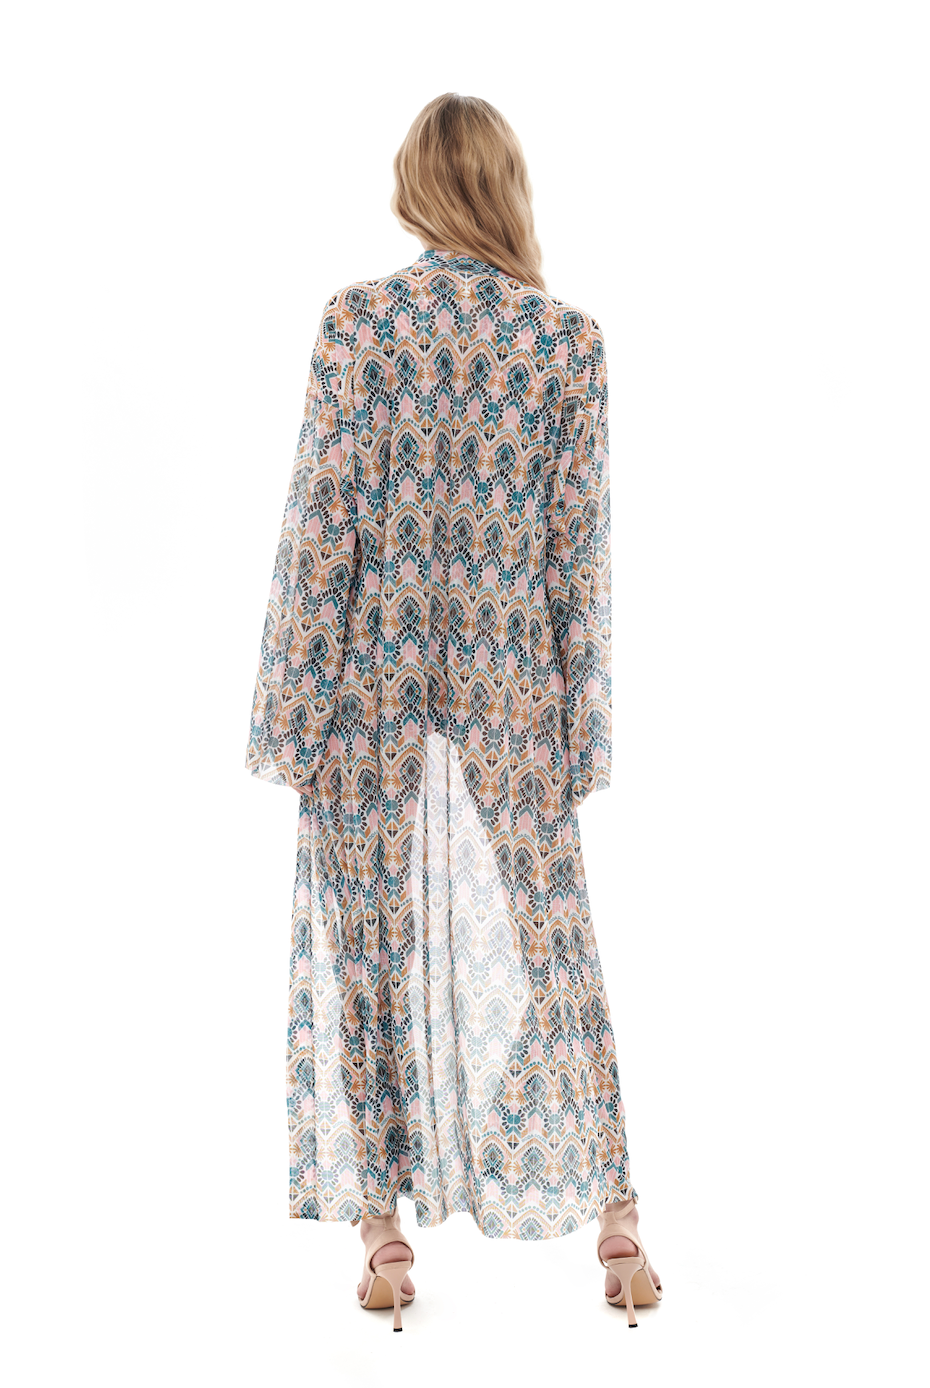 Discover our chic beach robe in the Casablanca print, ensuring SPF35 protection. Enjoy sustainable luxury with timeless style. Click to shop now and elevate your beachwear collection.